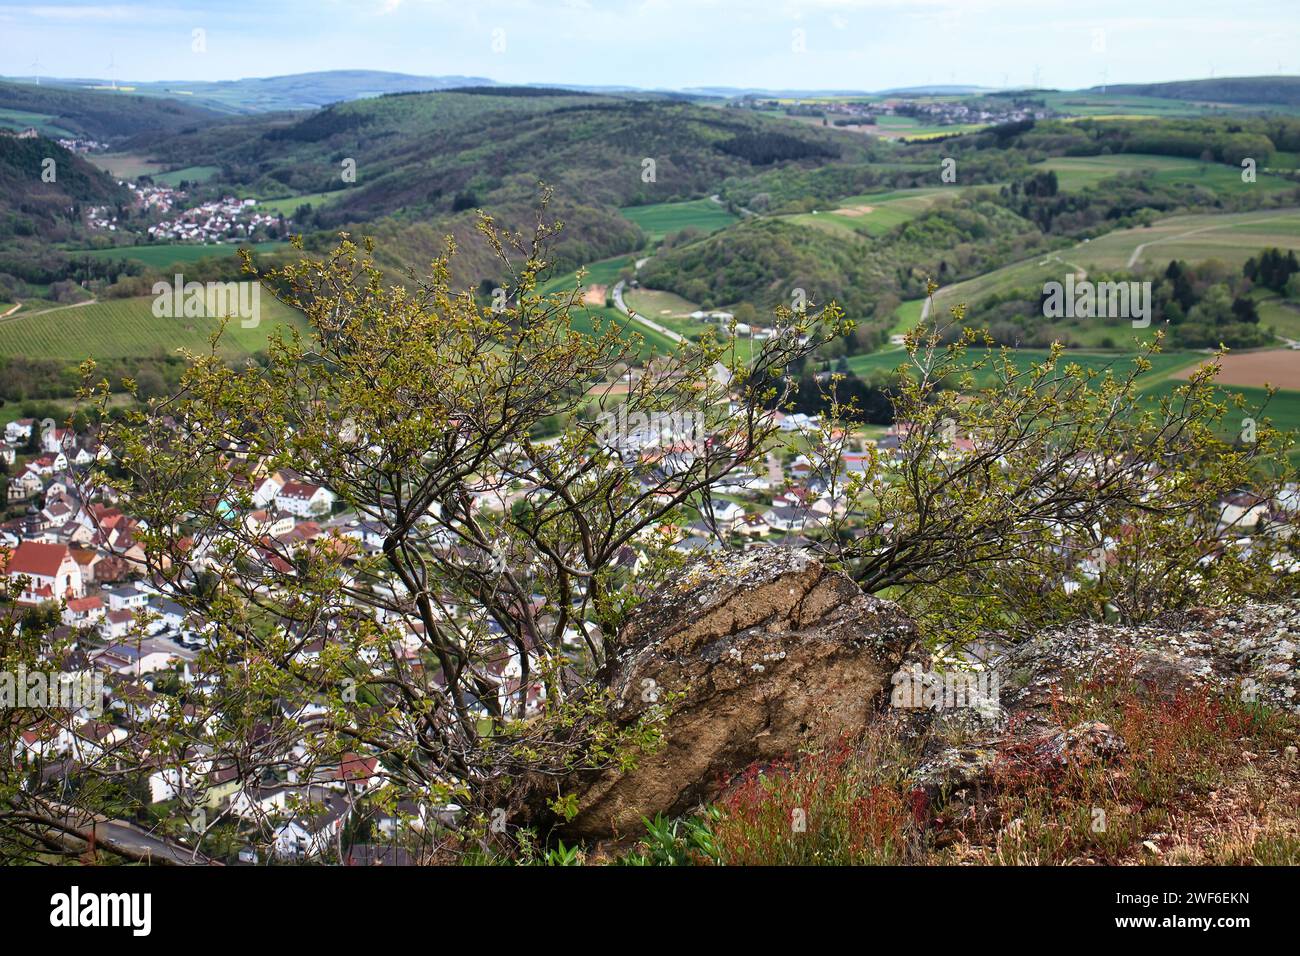 Tree growing on top of Rotenfels overlooking green fields and hills and a German town on a spring day in Rhineland Palatinate, Germany. Stock Photo